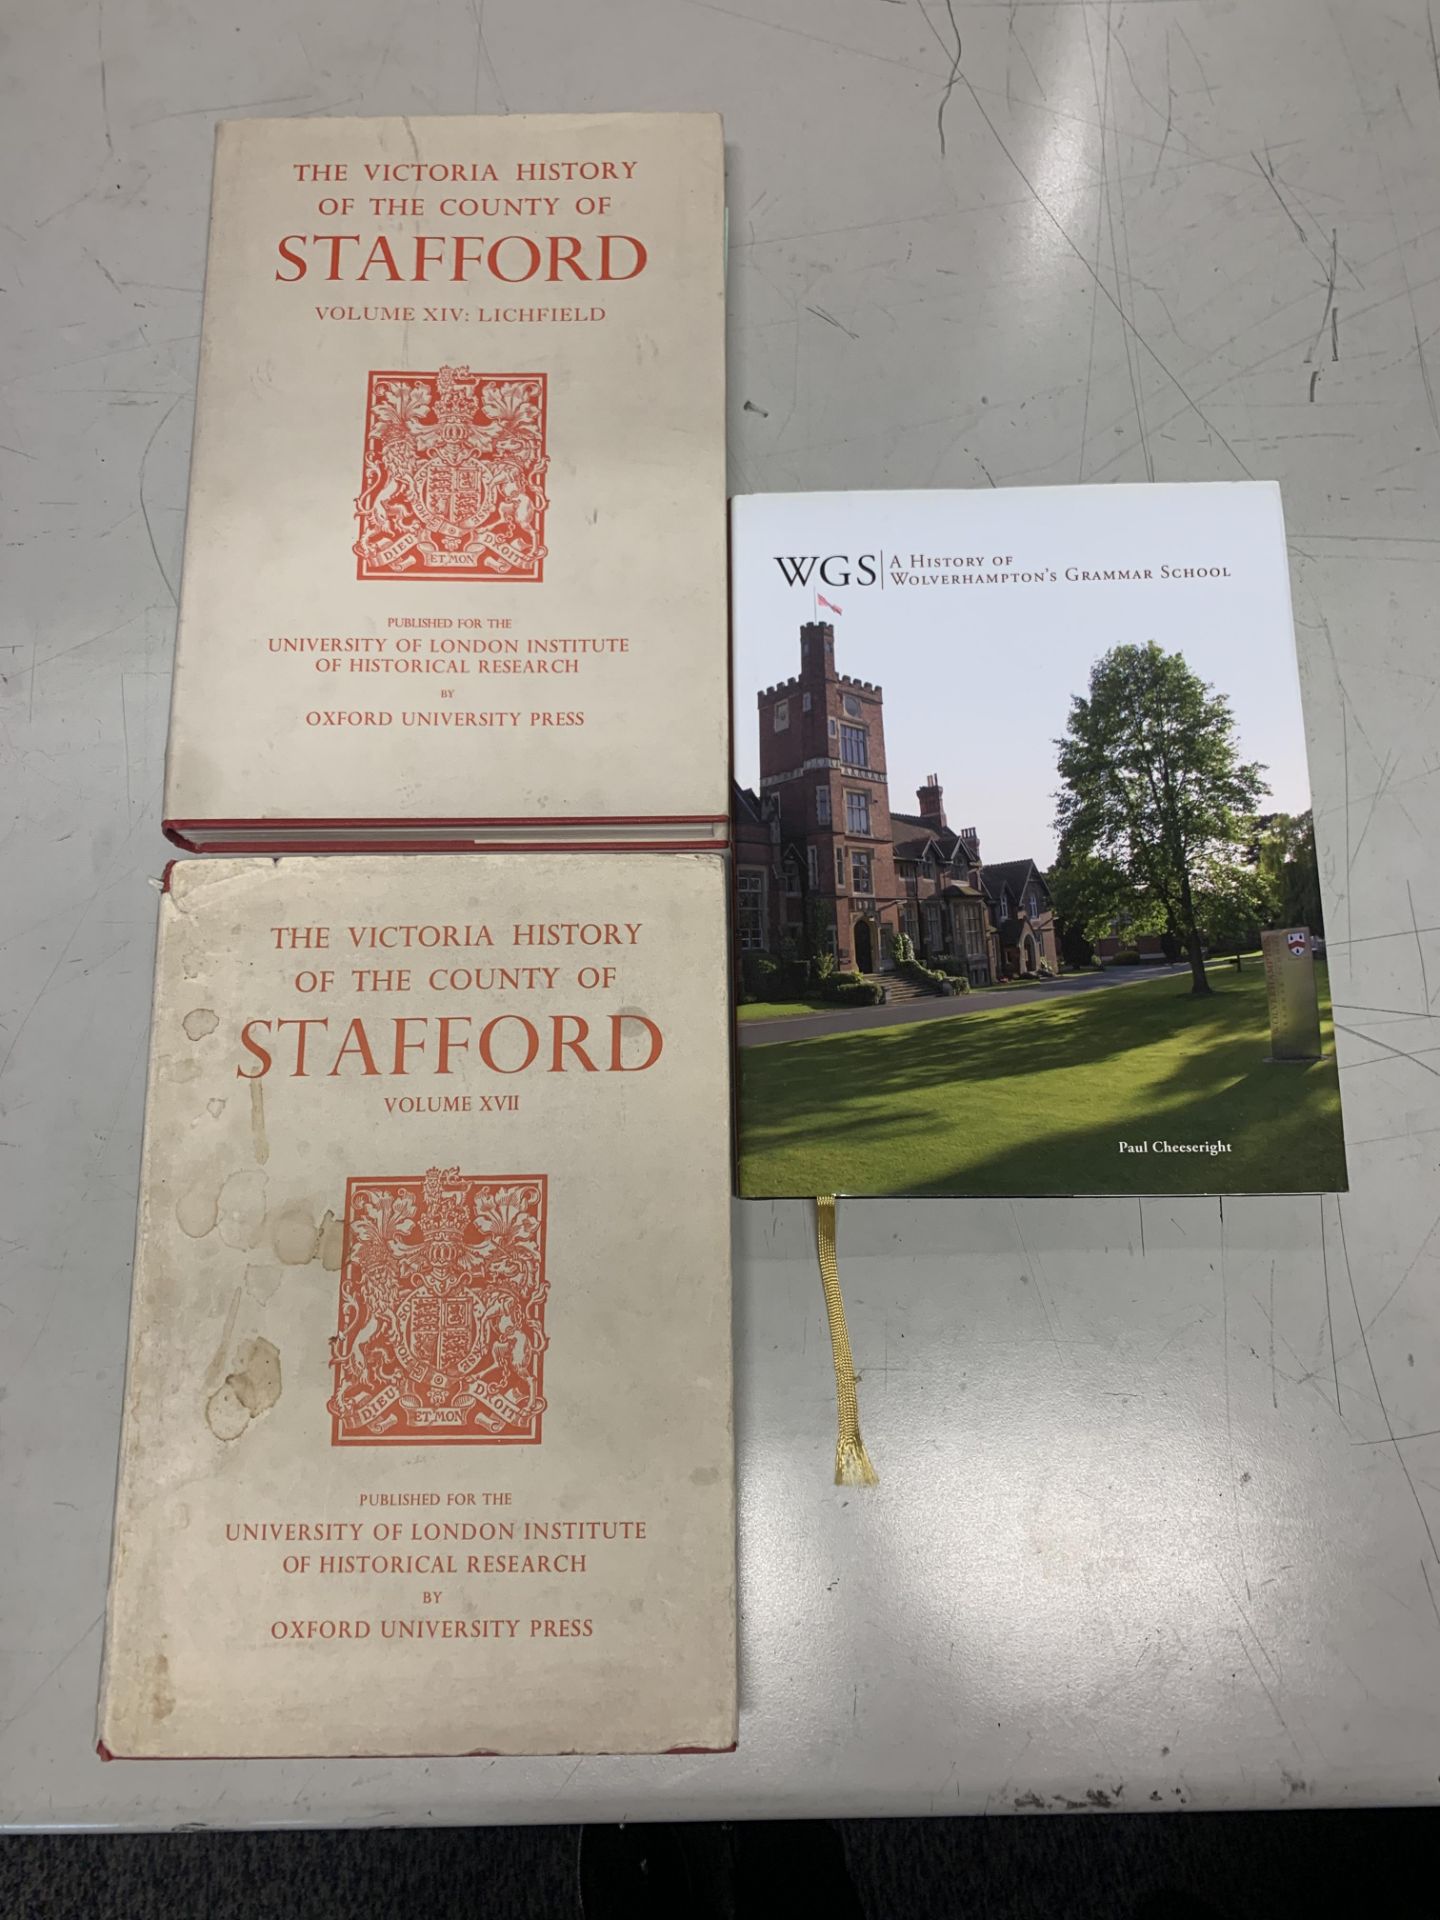 Local interest - The Victoria History of the County of Stafford Volume XVII published by the Oxford